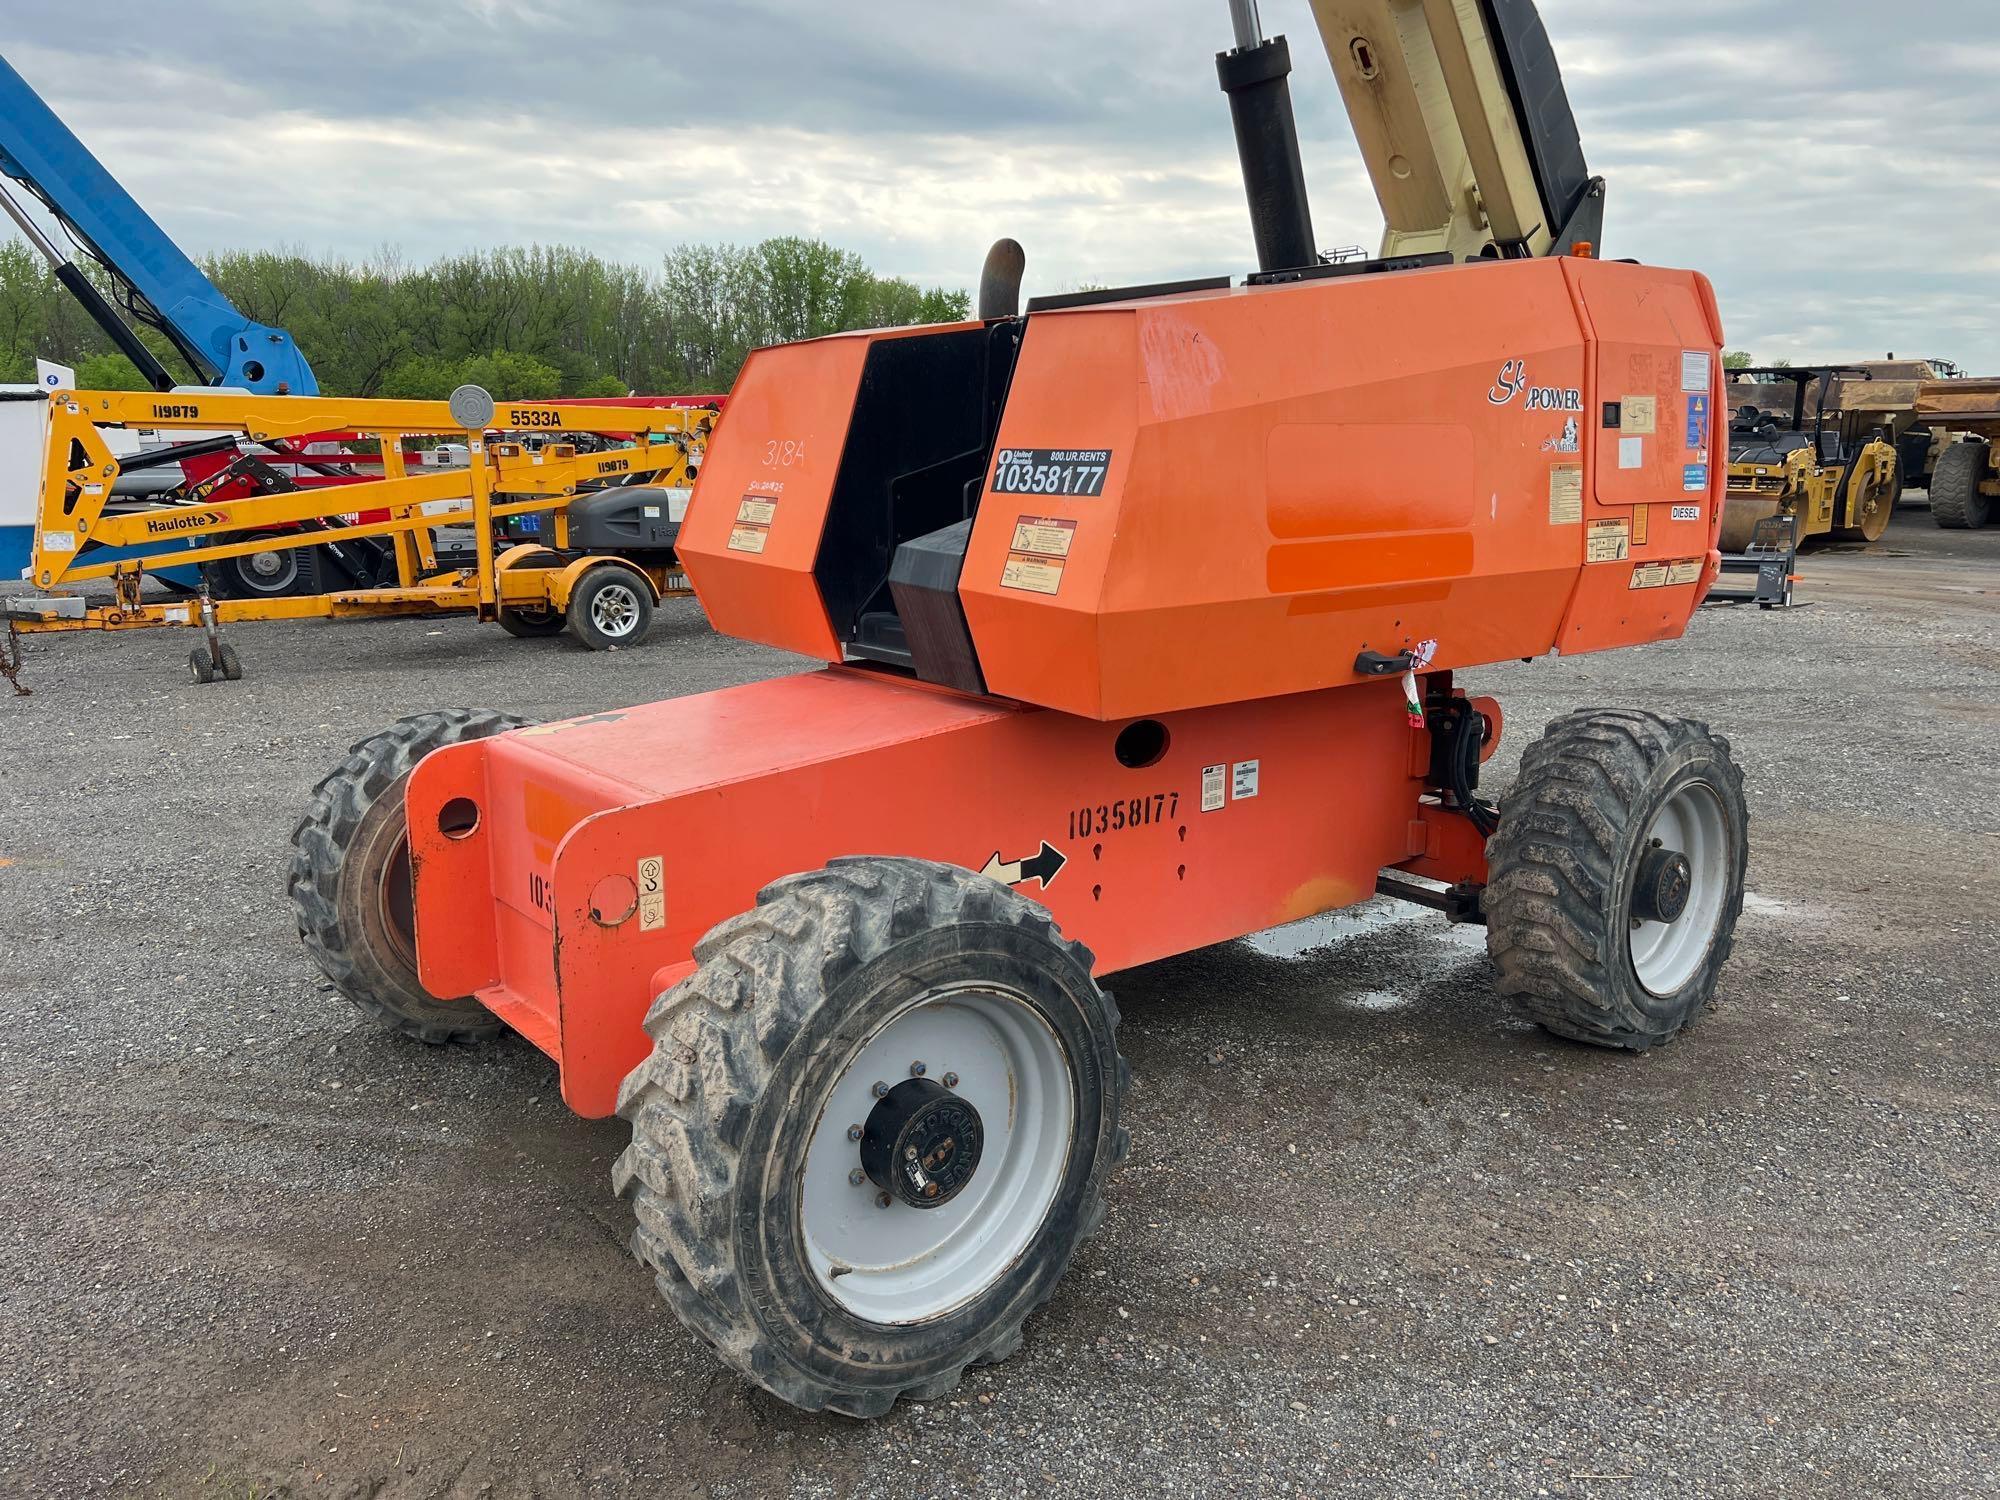 2015 JLG 600S BOOM LIFT SN:300201825 4x4, powered by diesel engine, equipped with 60ft. Platform